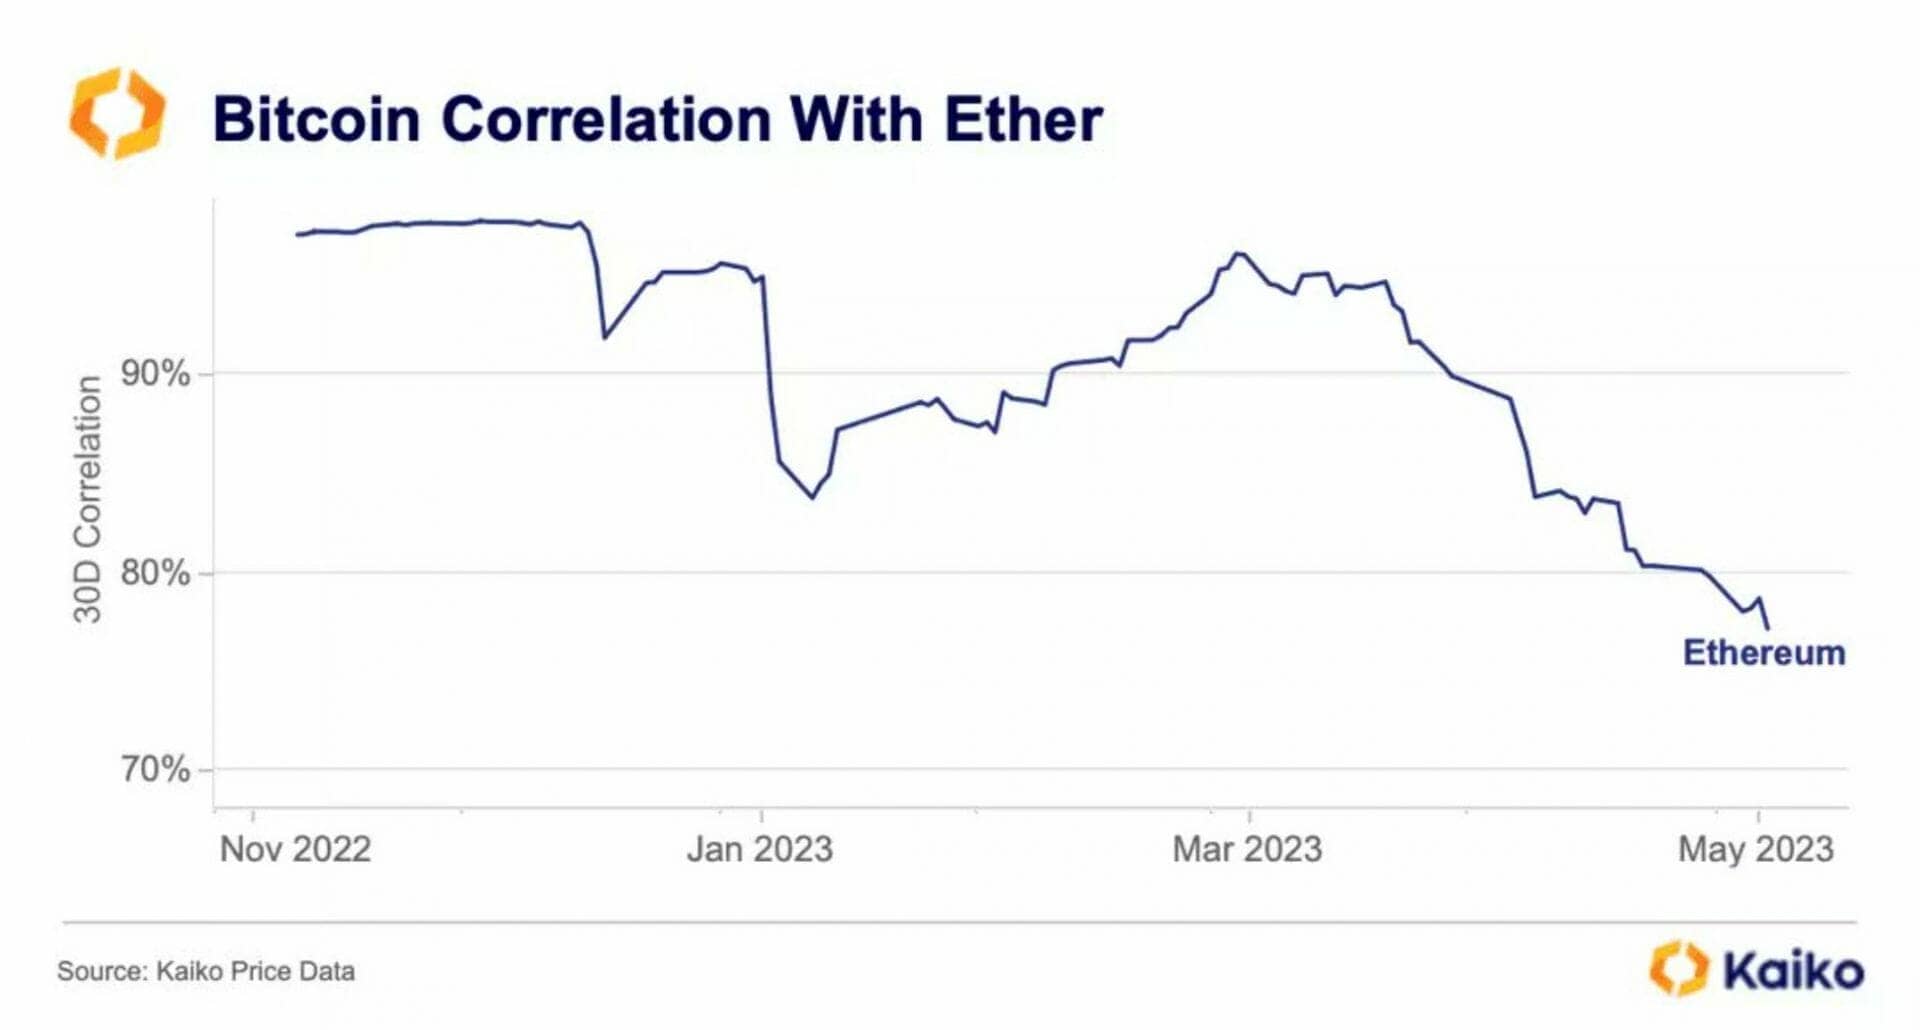 Correlation between Bitcoin and Ethereum has been falling since the end of 2022 - May 19, 2023